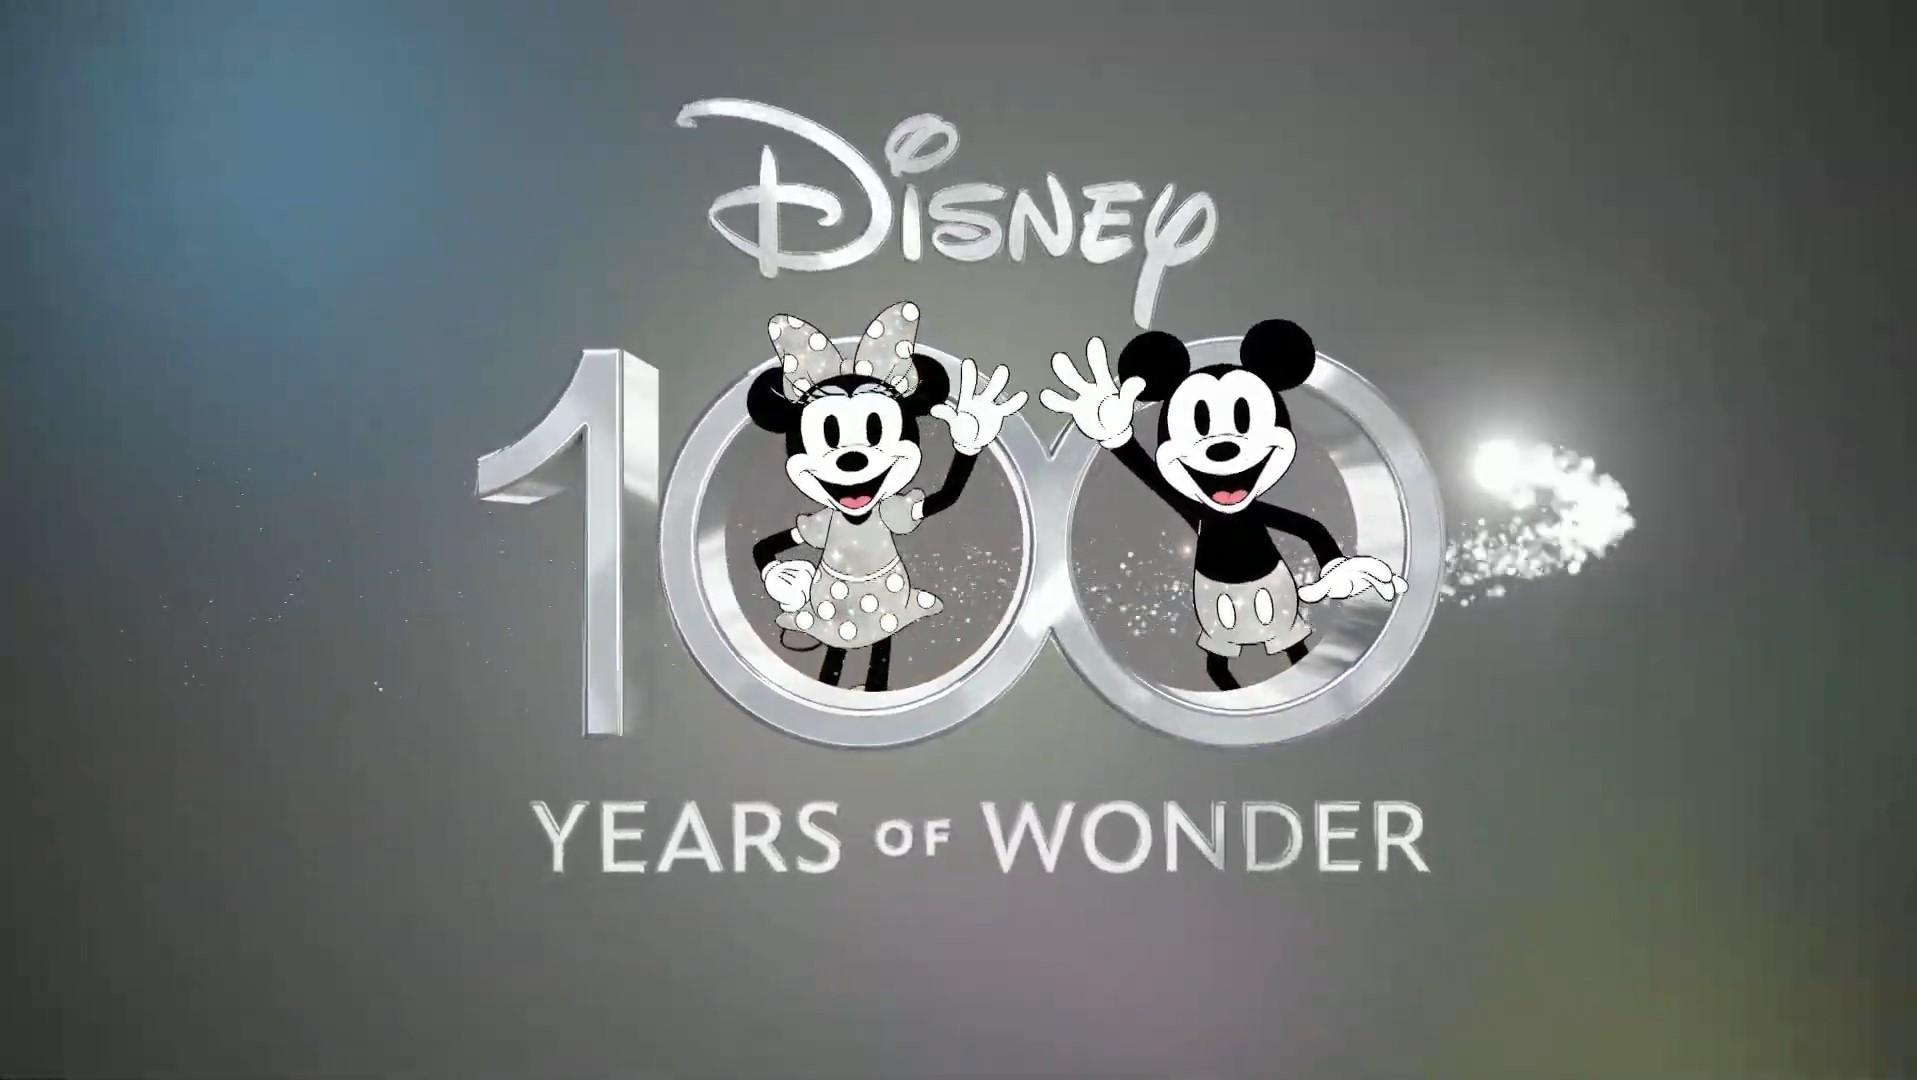 Disney's 100th Anniversary Celebration to Begin at 2022's D23 Event